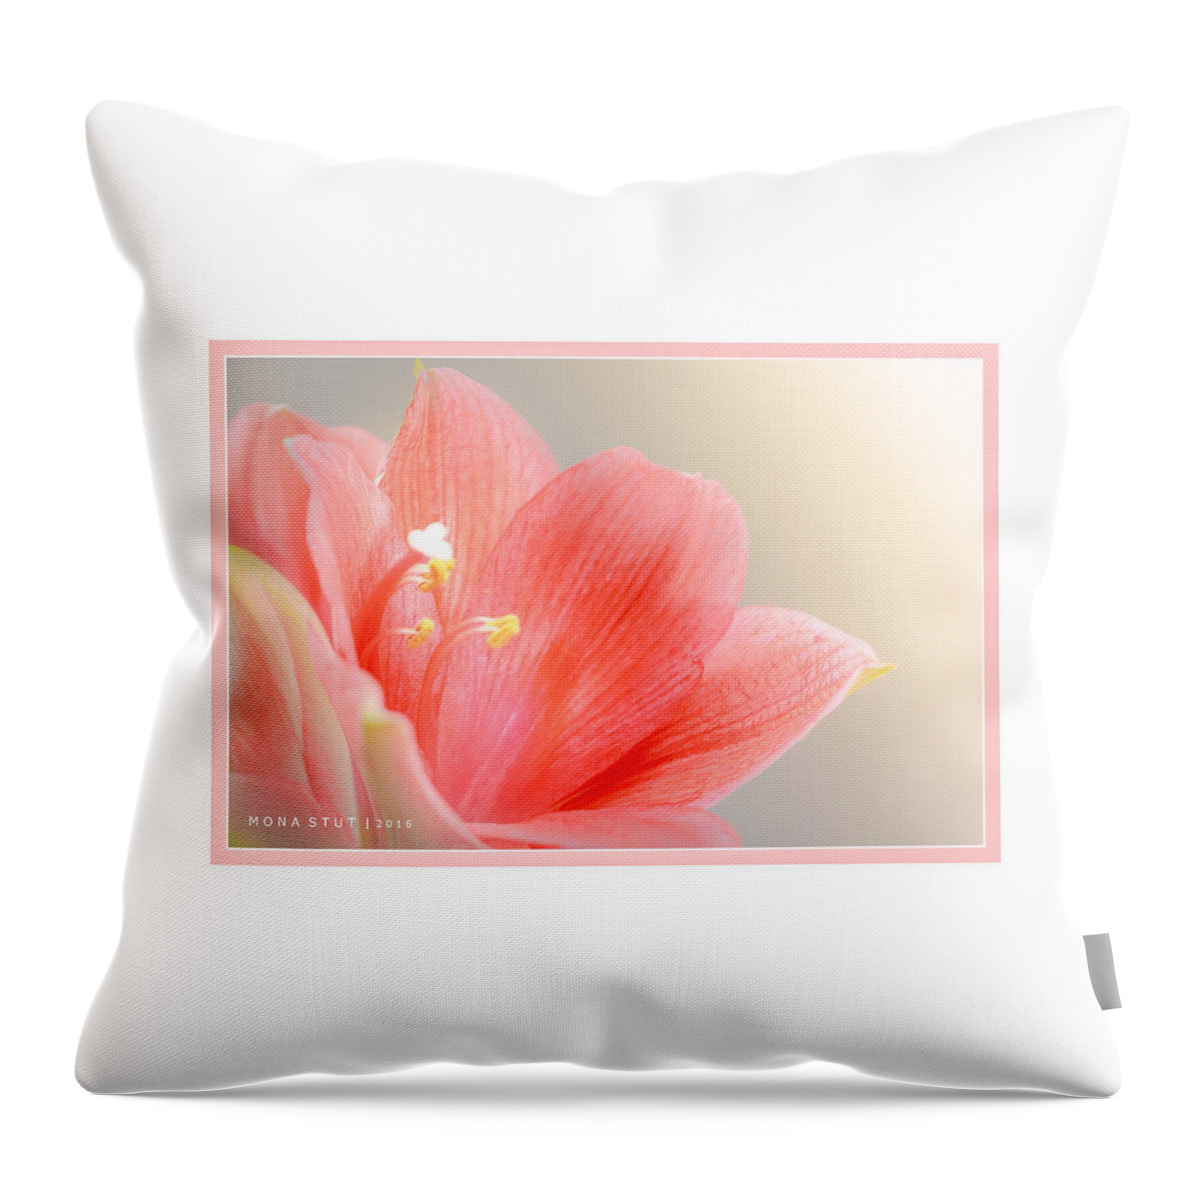 Mona Stut Throw Pillow featuring the photograph Delicate Blushing Bride Lily by Mona Stut